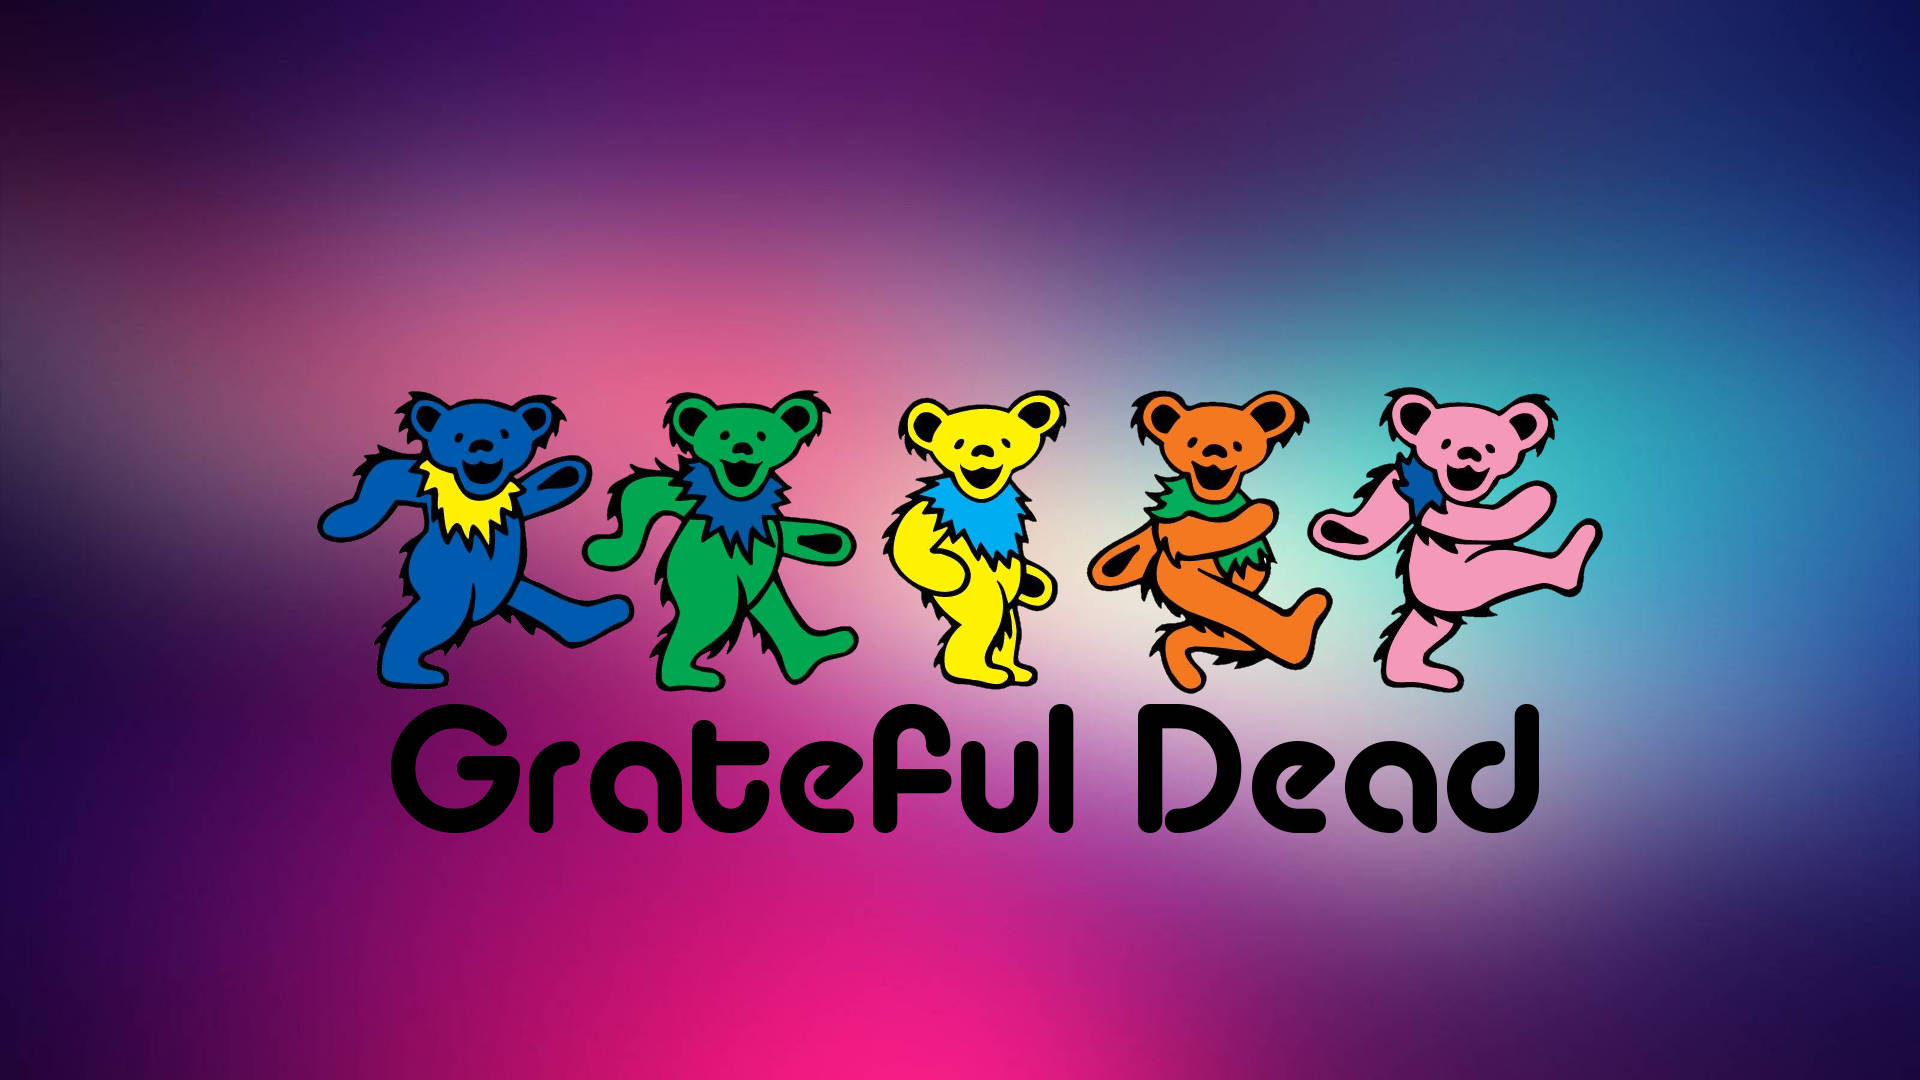 Grateful Dead Marching Bears Background